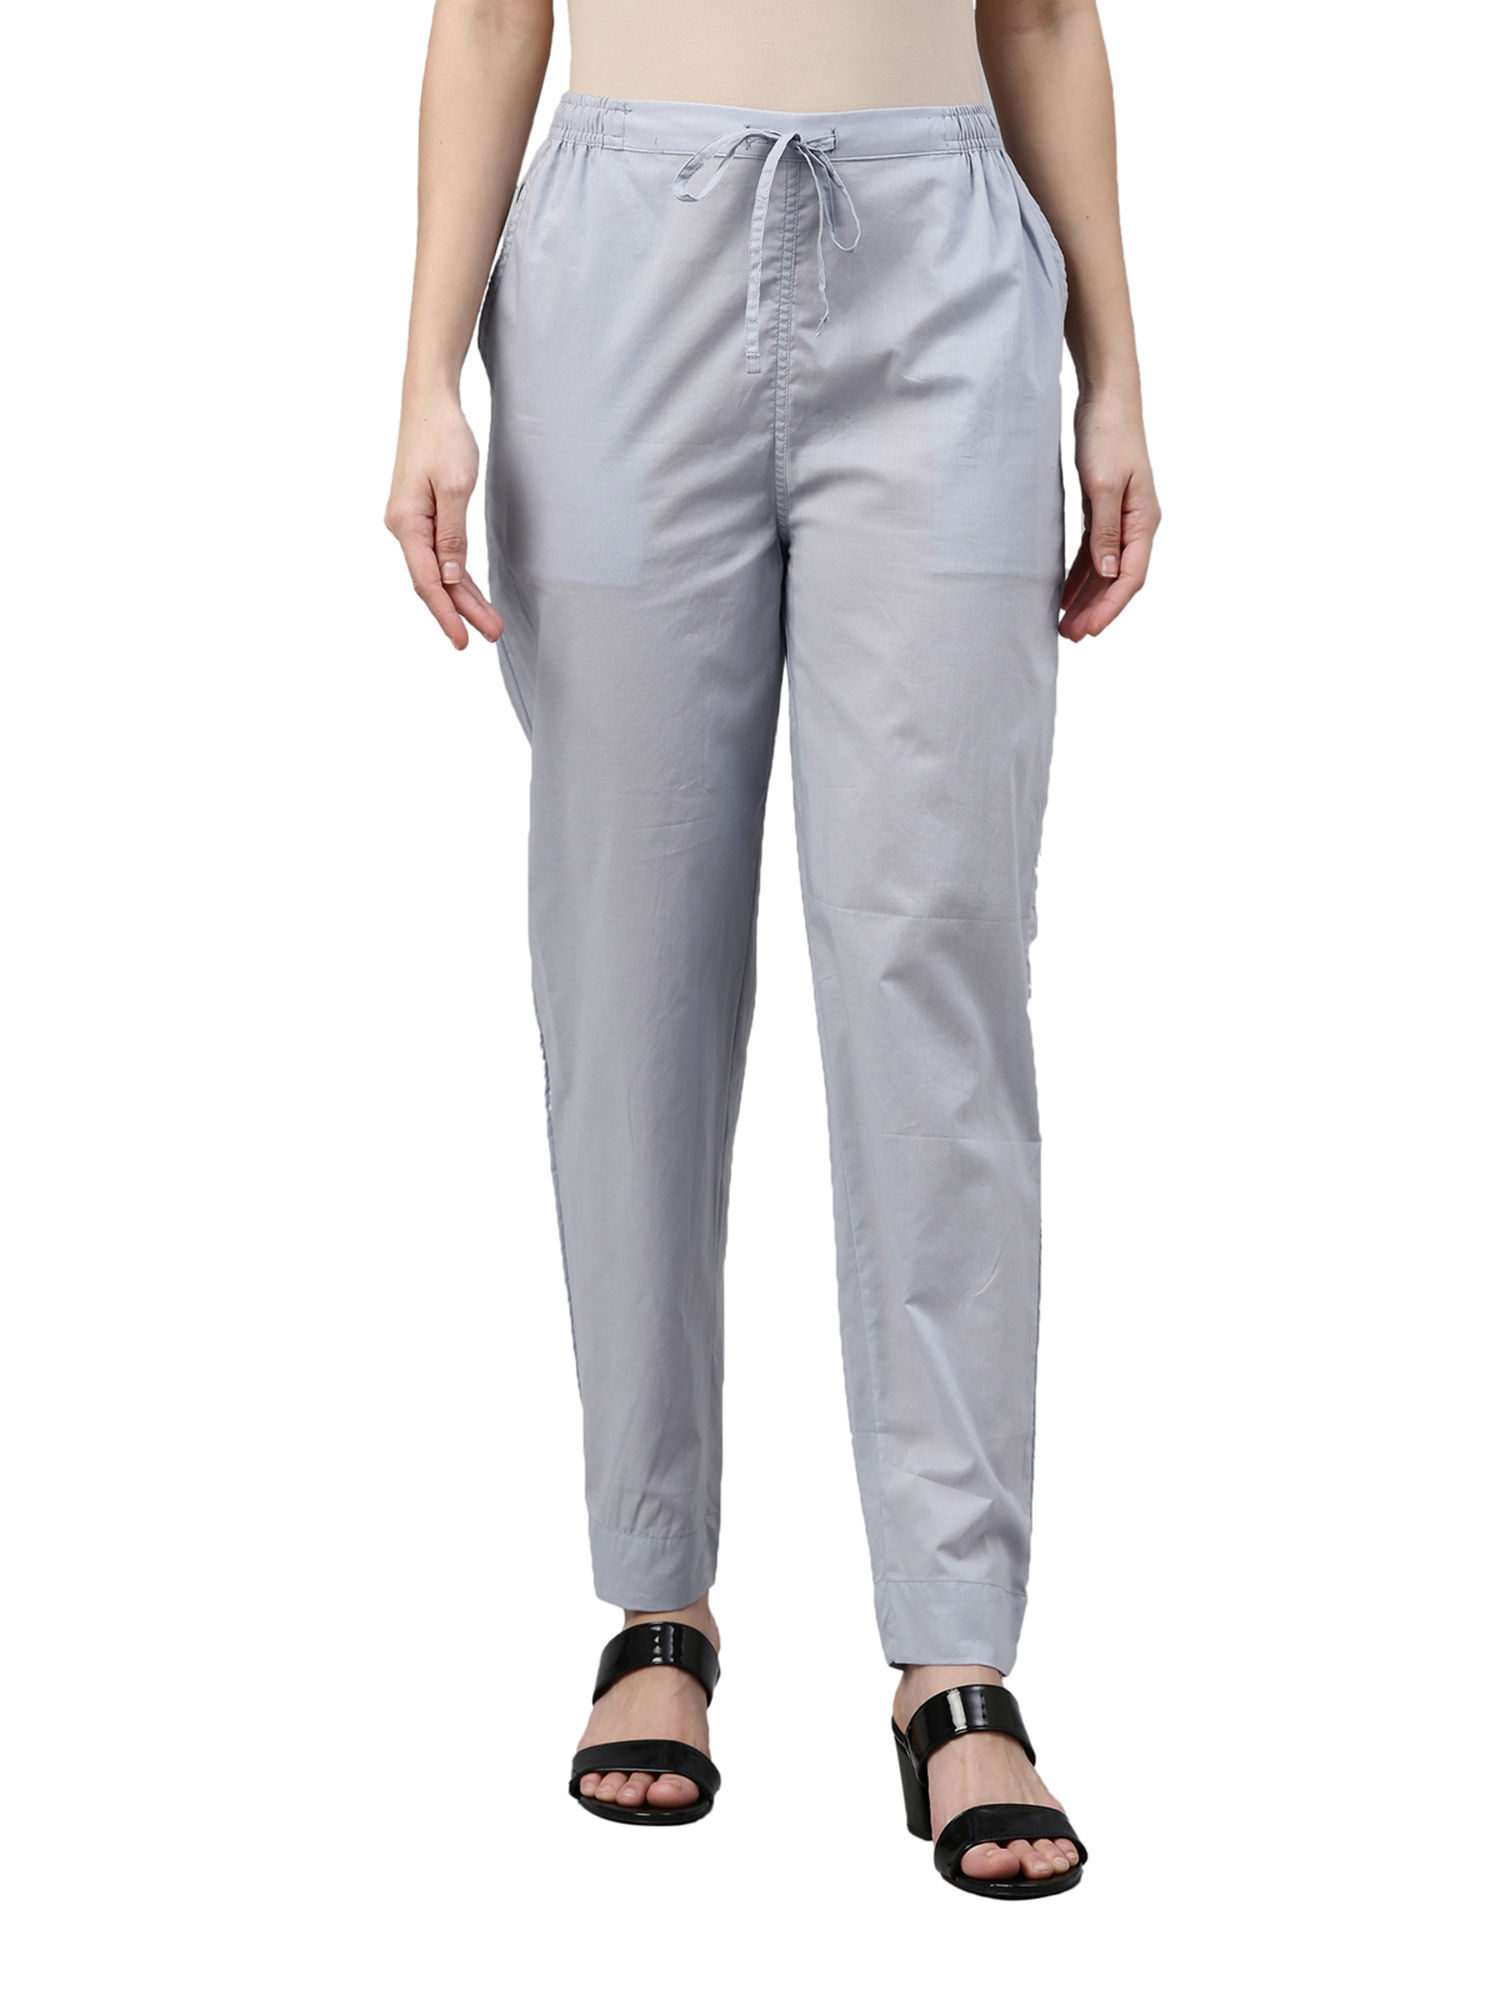 Ladies Trousers MS ARK MULTICREATIONS PRIVATE LIMITED  TranZact